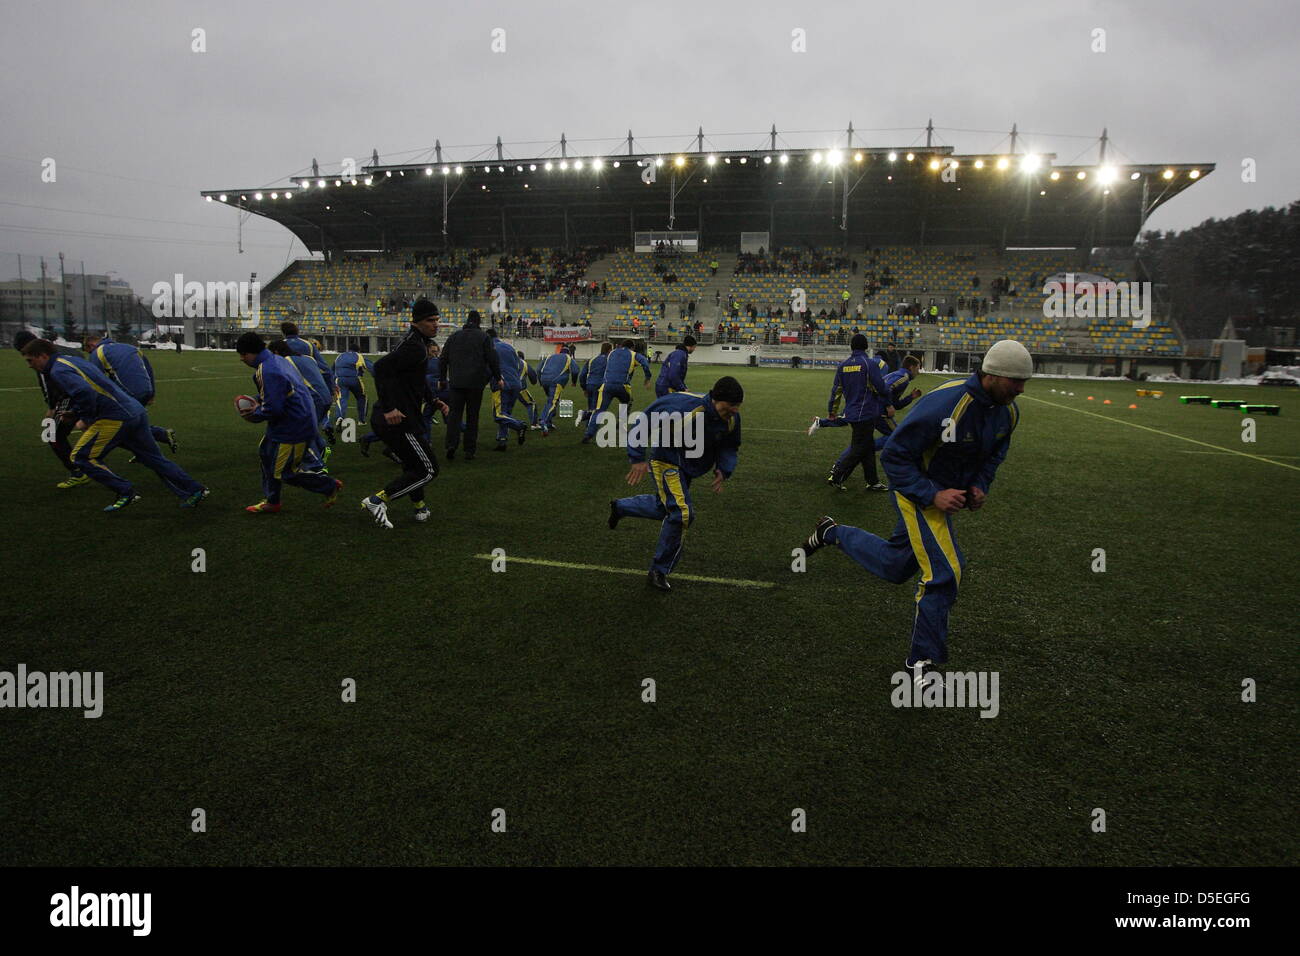 Gdynia, Poland 30th, March 2013 Rugby FIRA Championship , European Nations Cup - Poland v Ukraine game at National Rugby Stadium in Gdynia. Pictured : Ukrainian National Team warm-up before the game Stock Photo